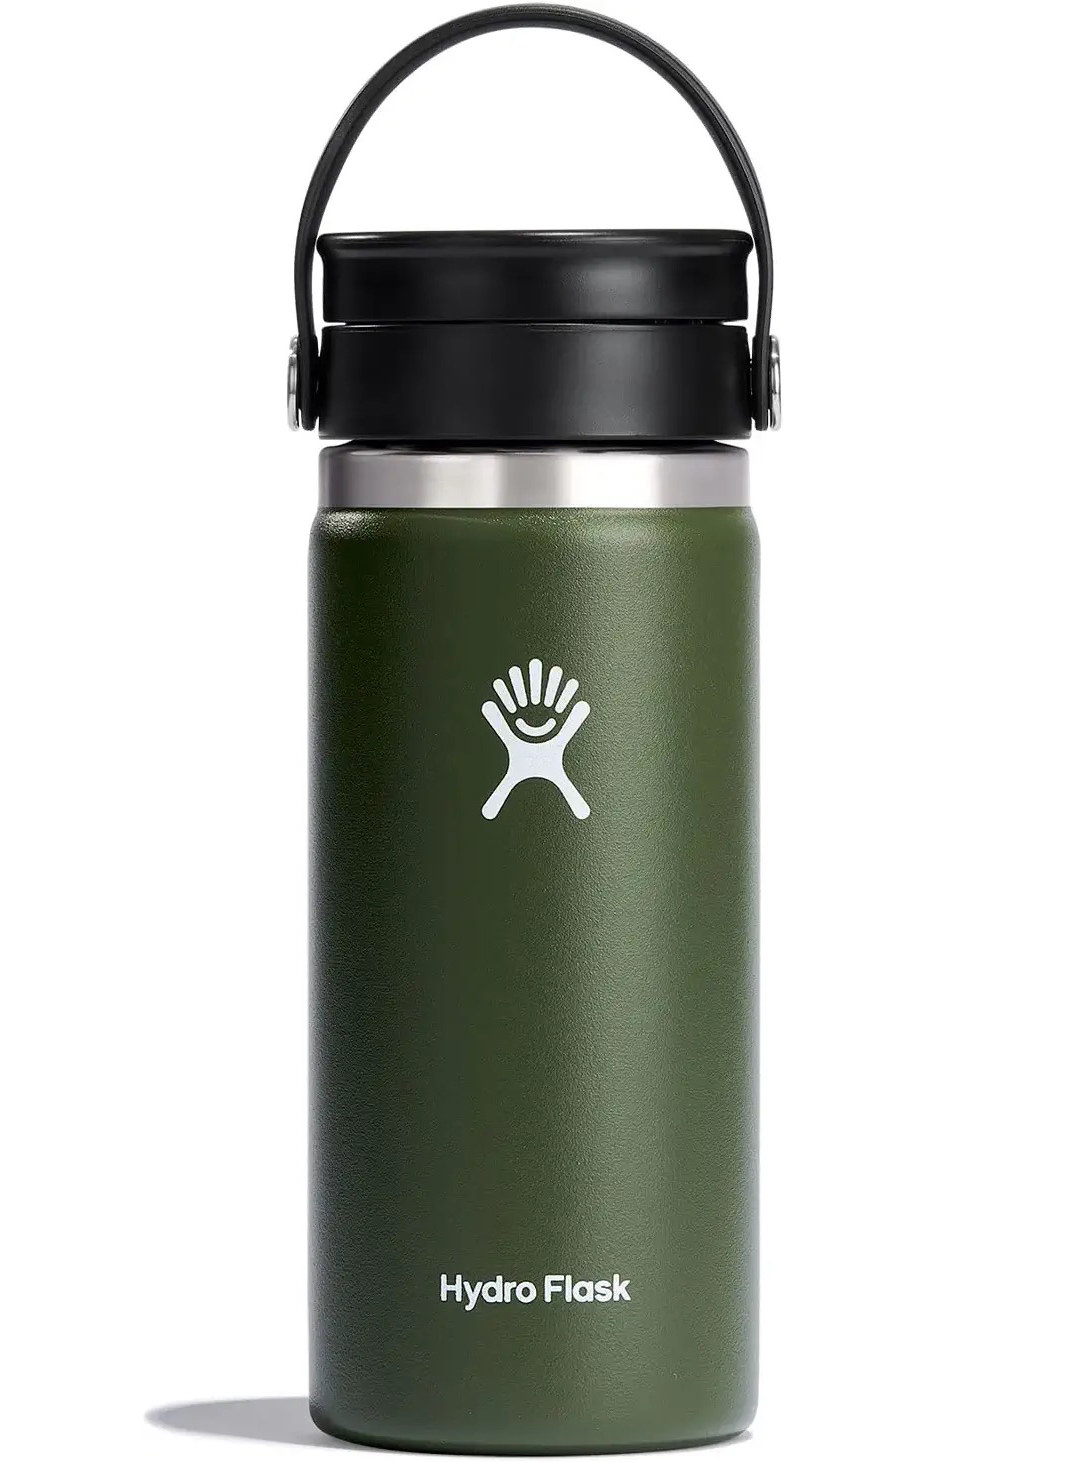 A forest green metal bottle with a black lid and handle